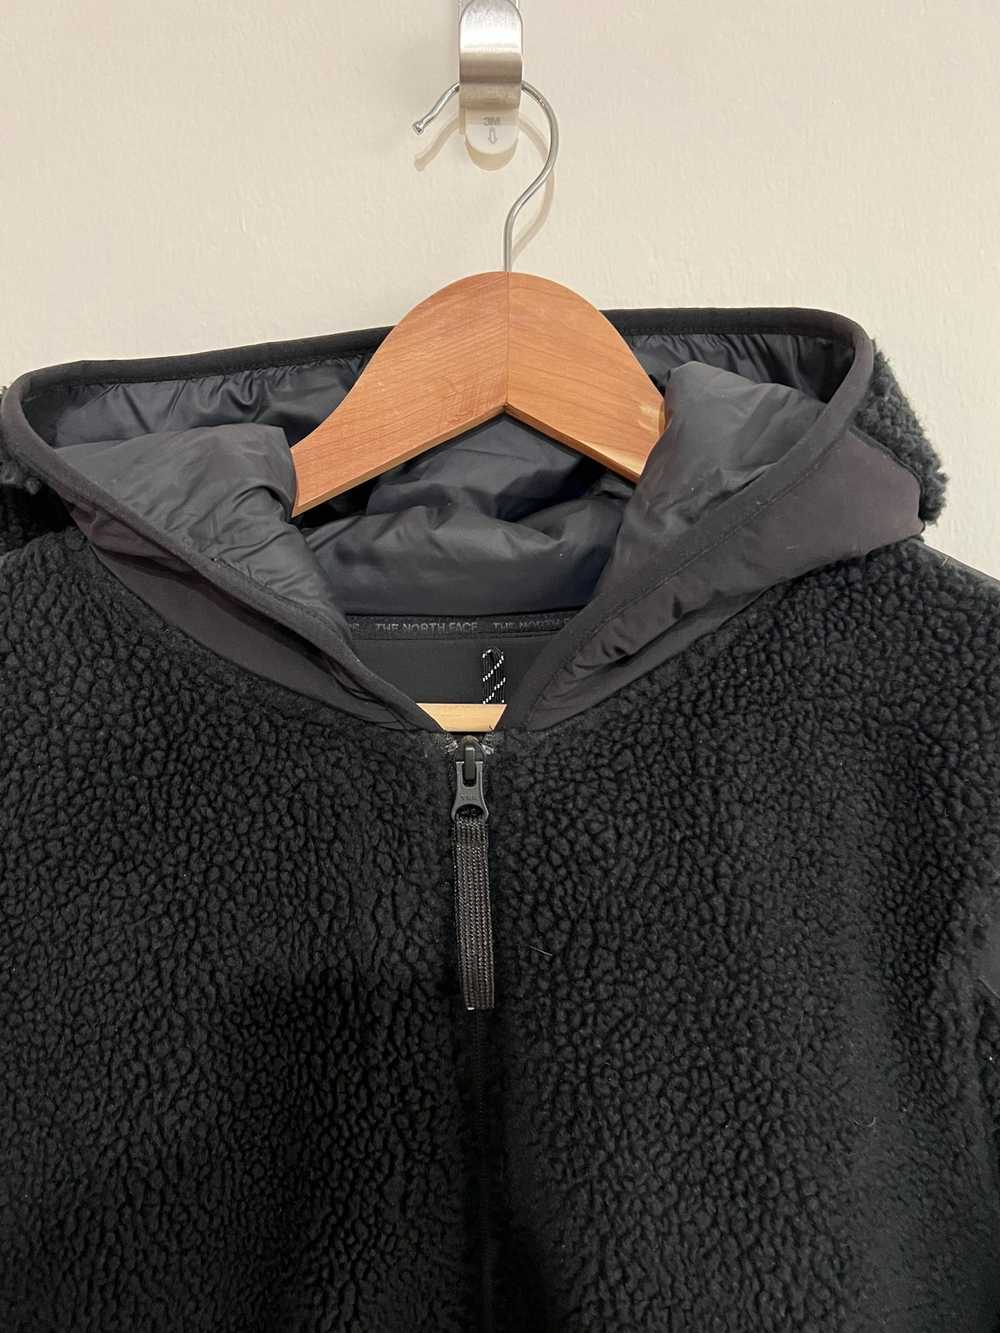 The North Face North Face Black Label Sherpa Flee… - image 2